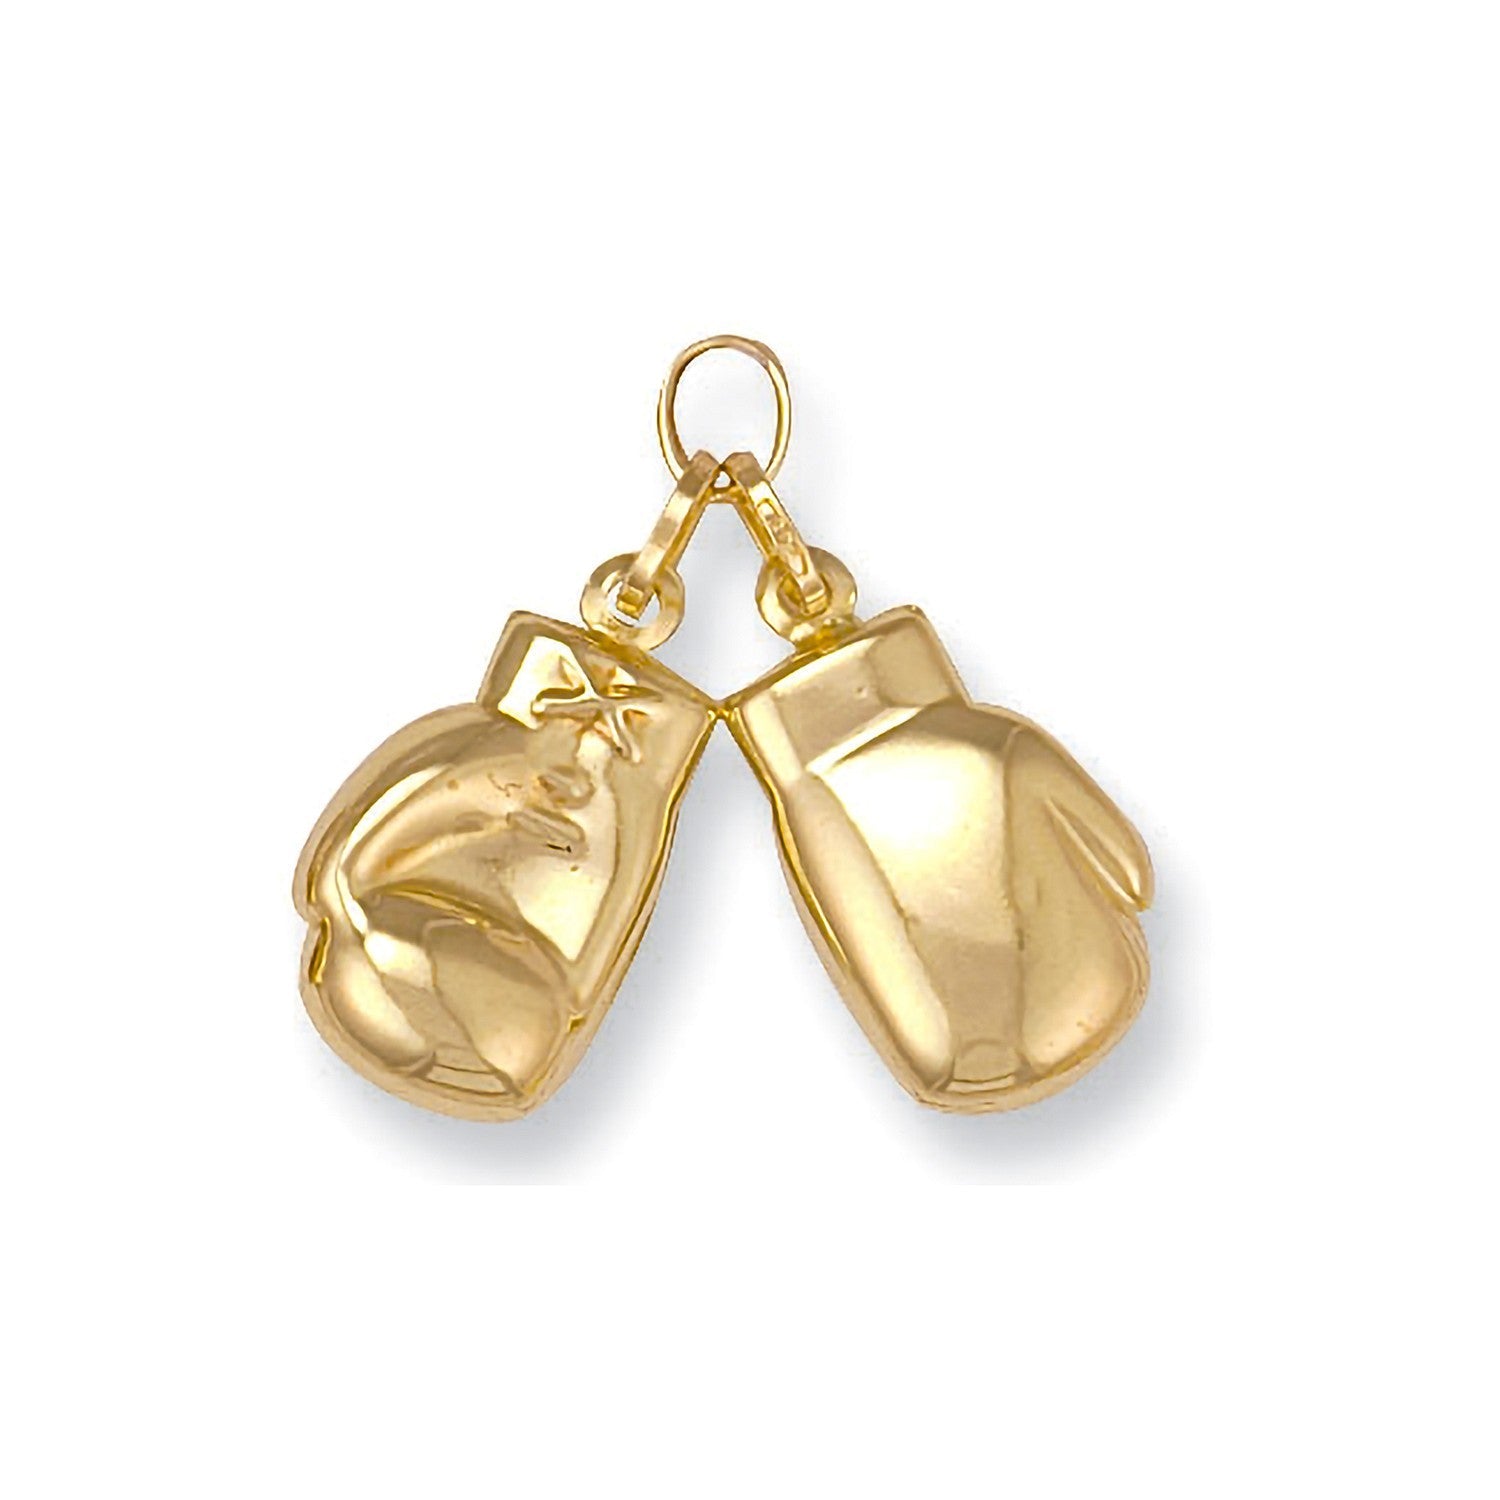 9ct Yellow Gold Boxing Plain Gloves Pendant - FJewellery